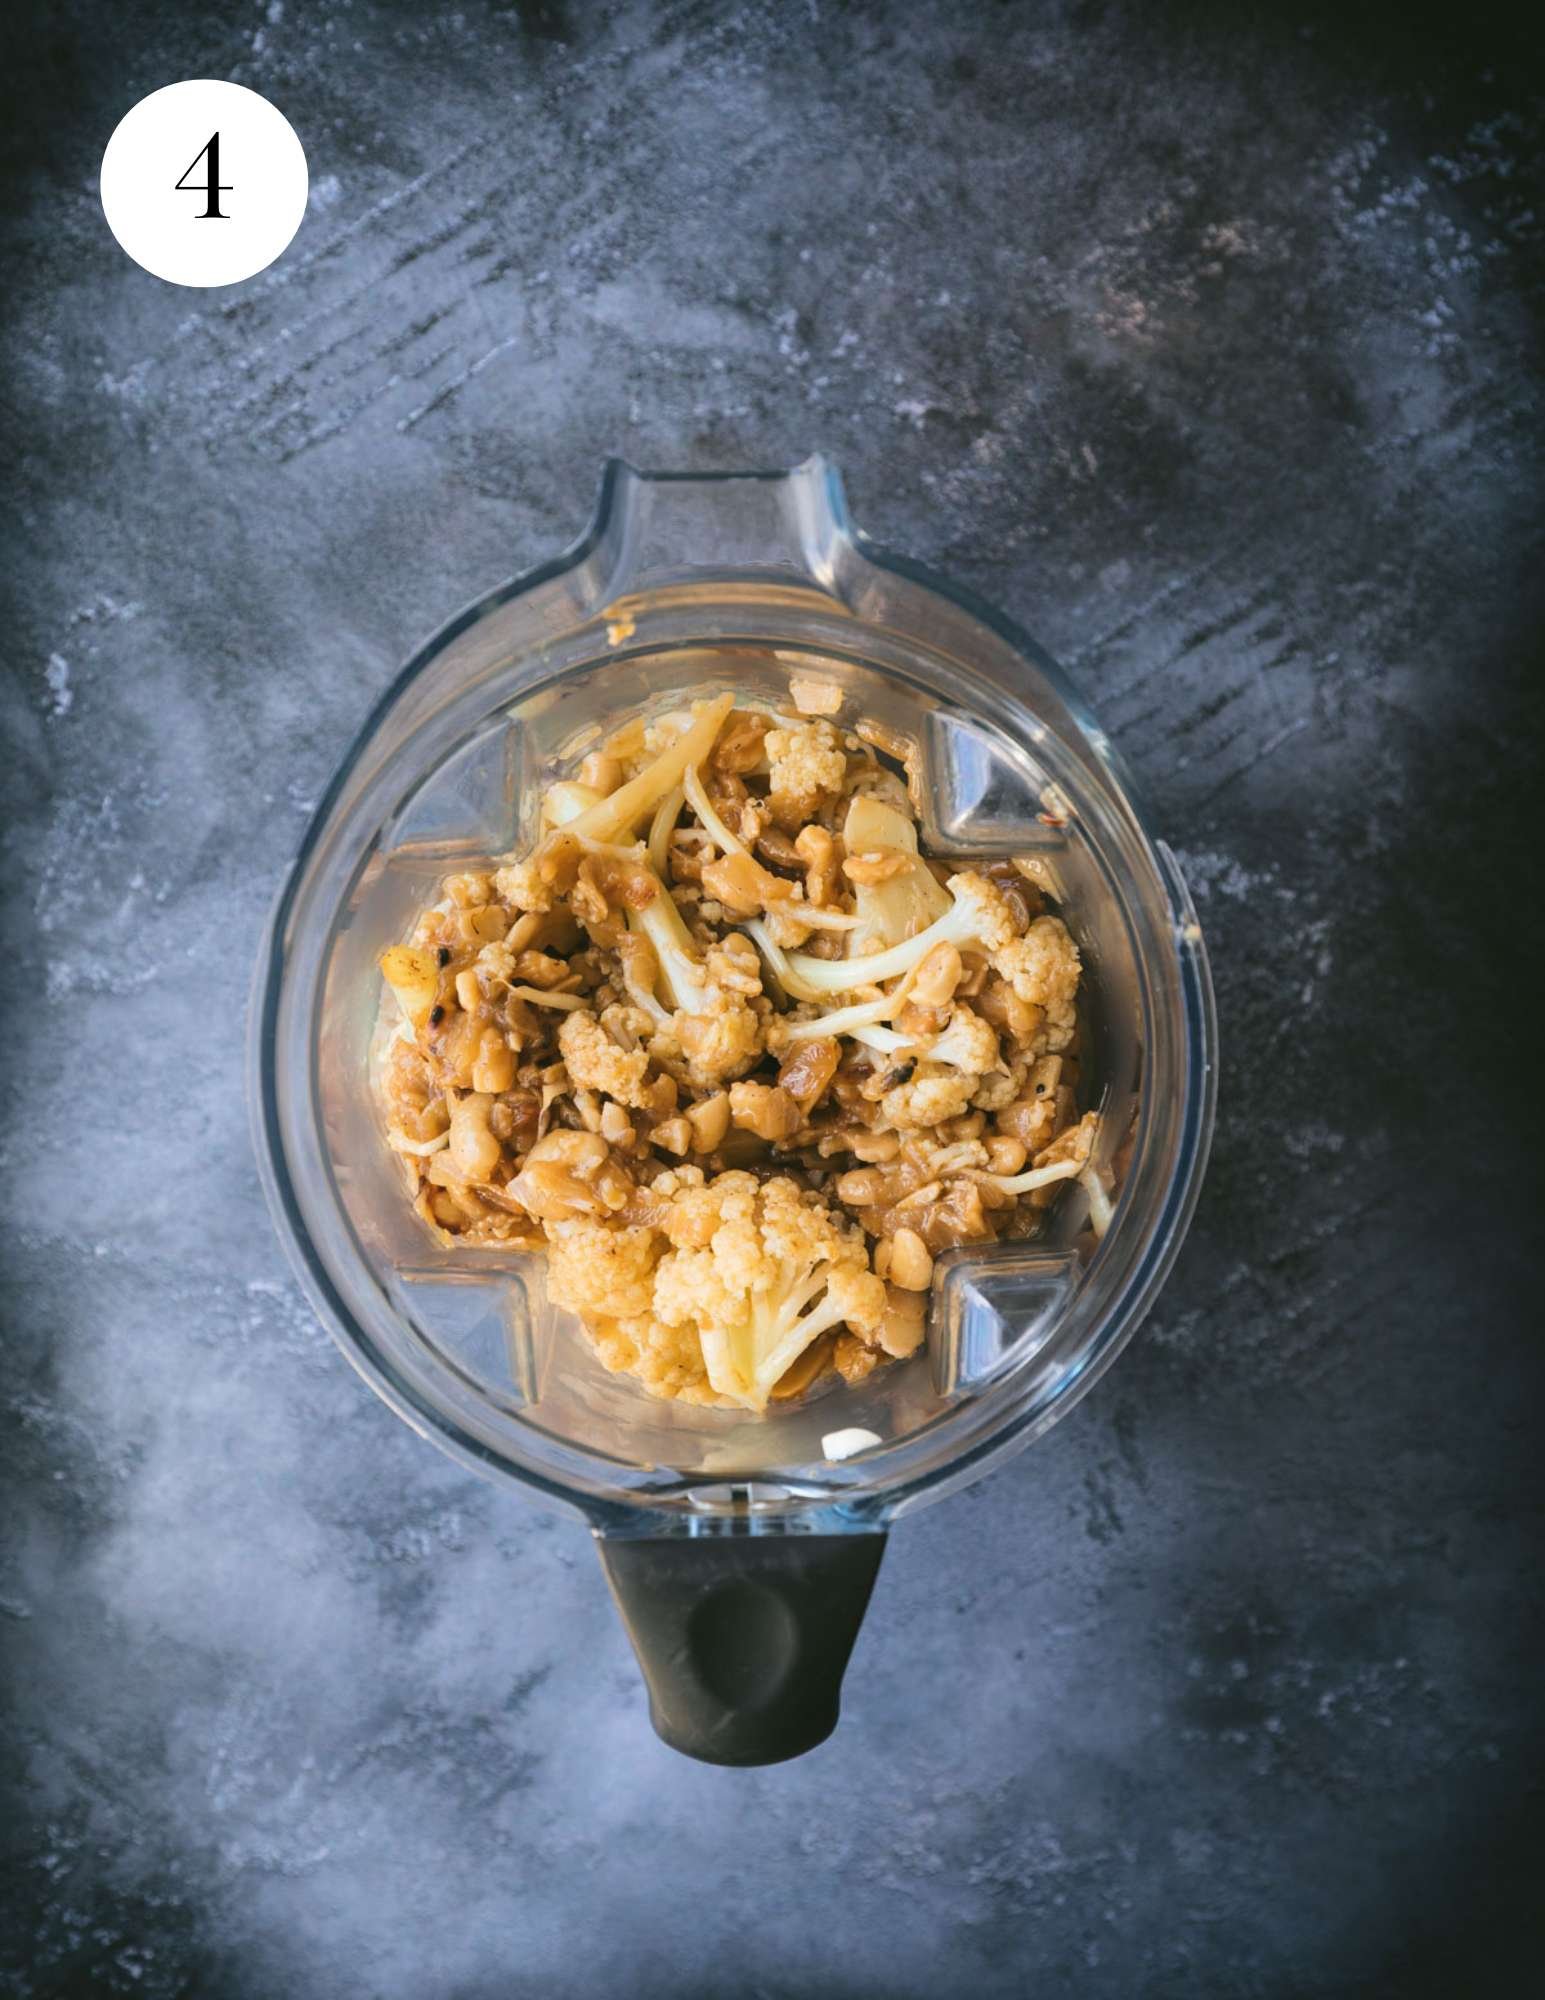 Cauliflower and cashews in a blender container.